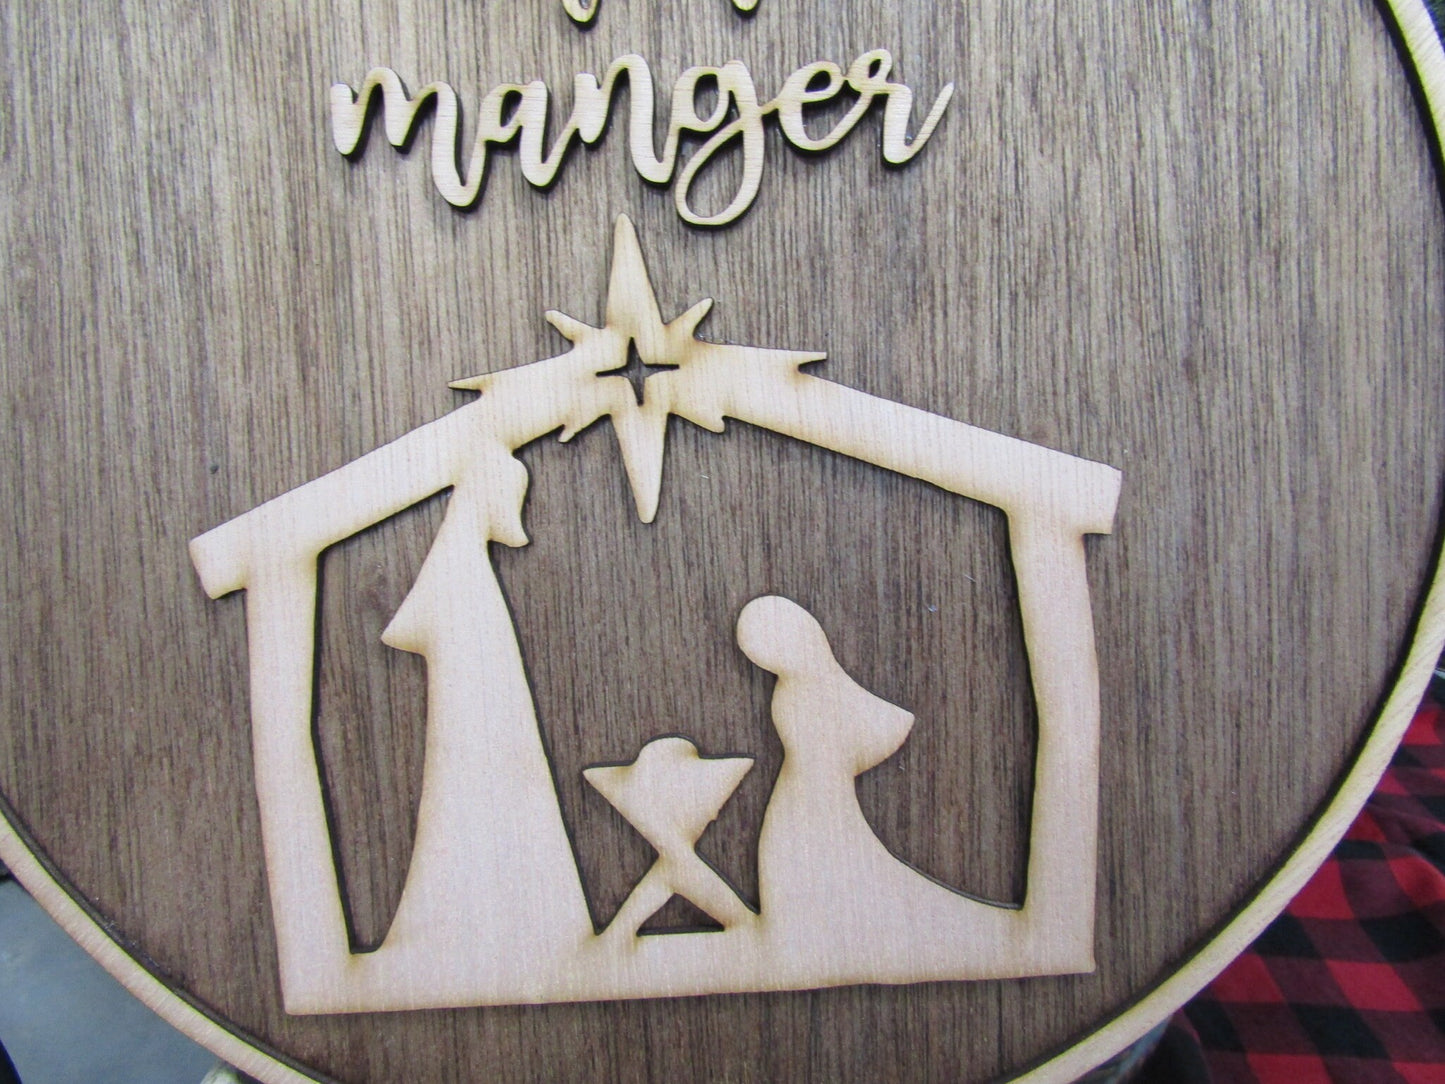 Christmas Away In A Manger Jesus Birth of Christ Faith Winter Decor Wooden Natural Gift Round Holiday Handmade Wall Hanging Sign 3D